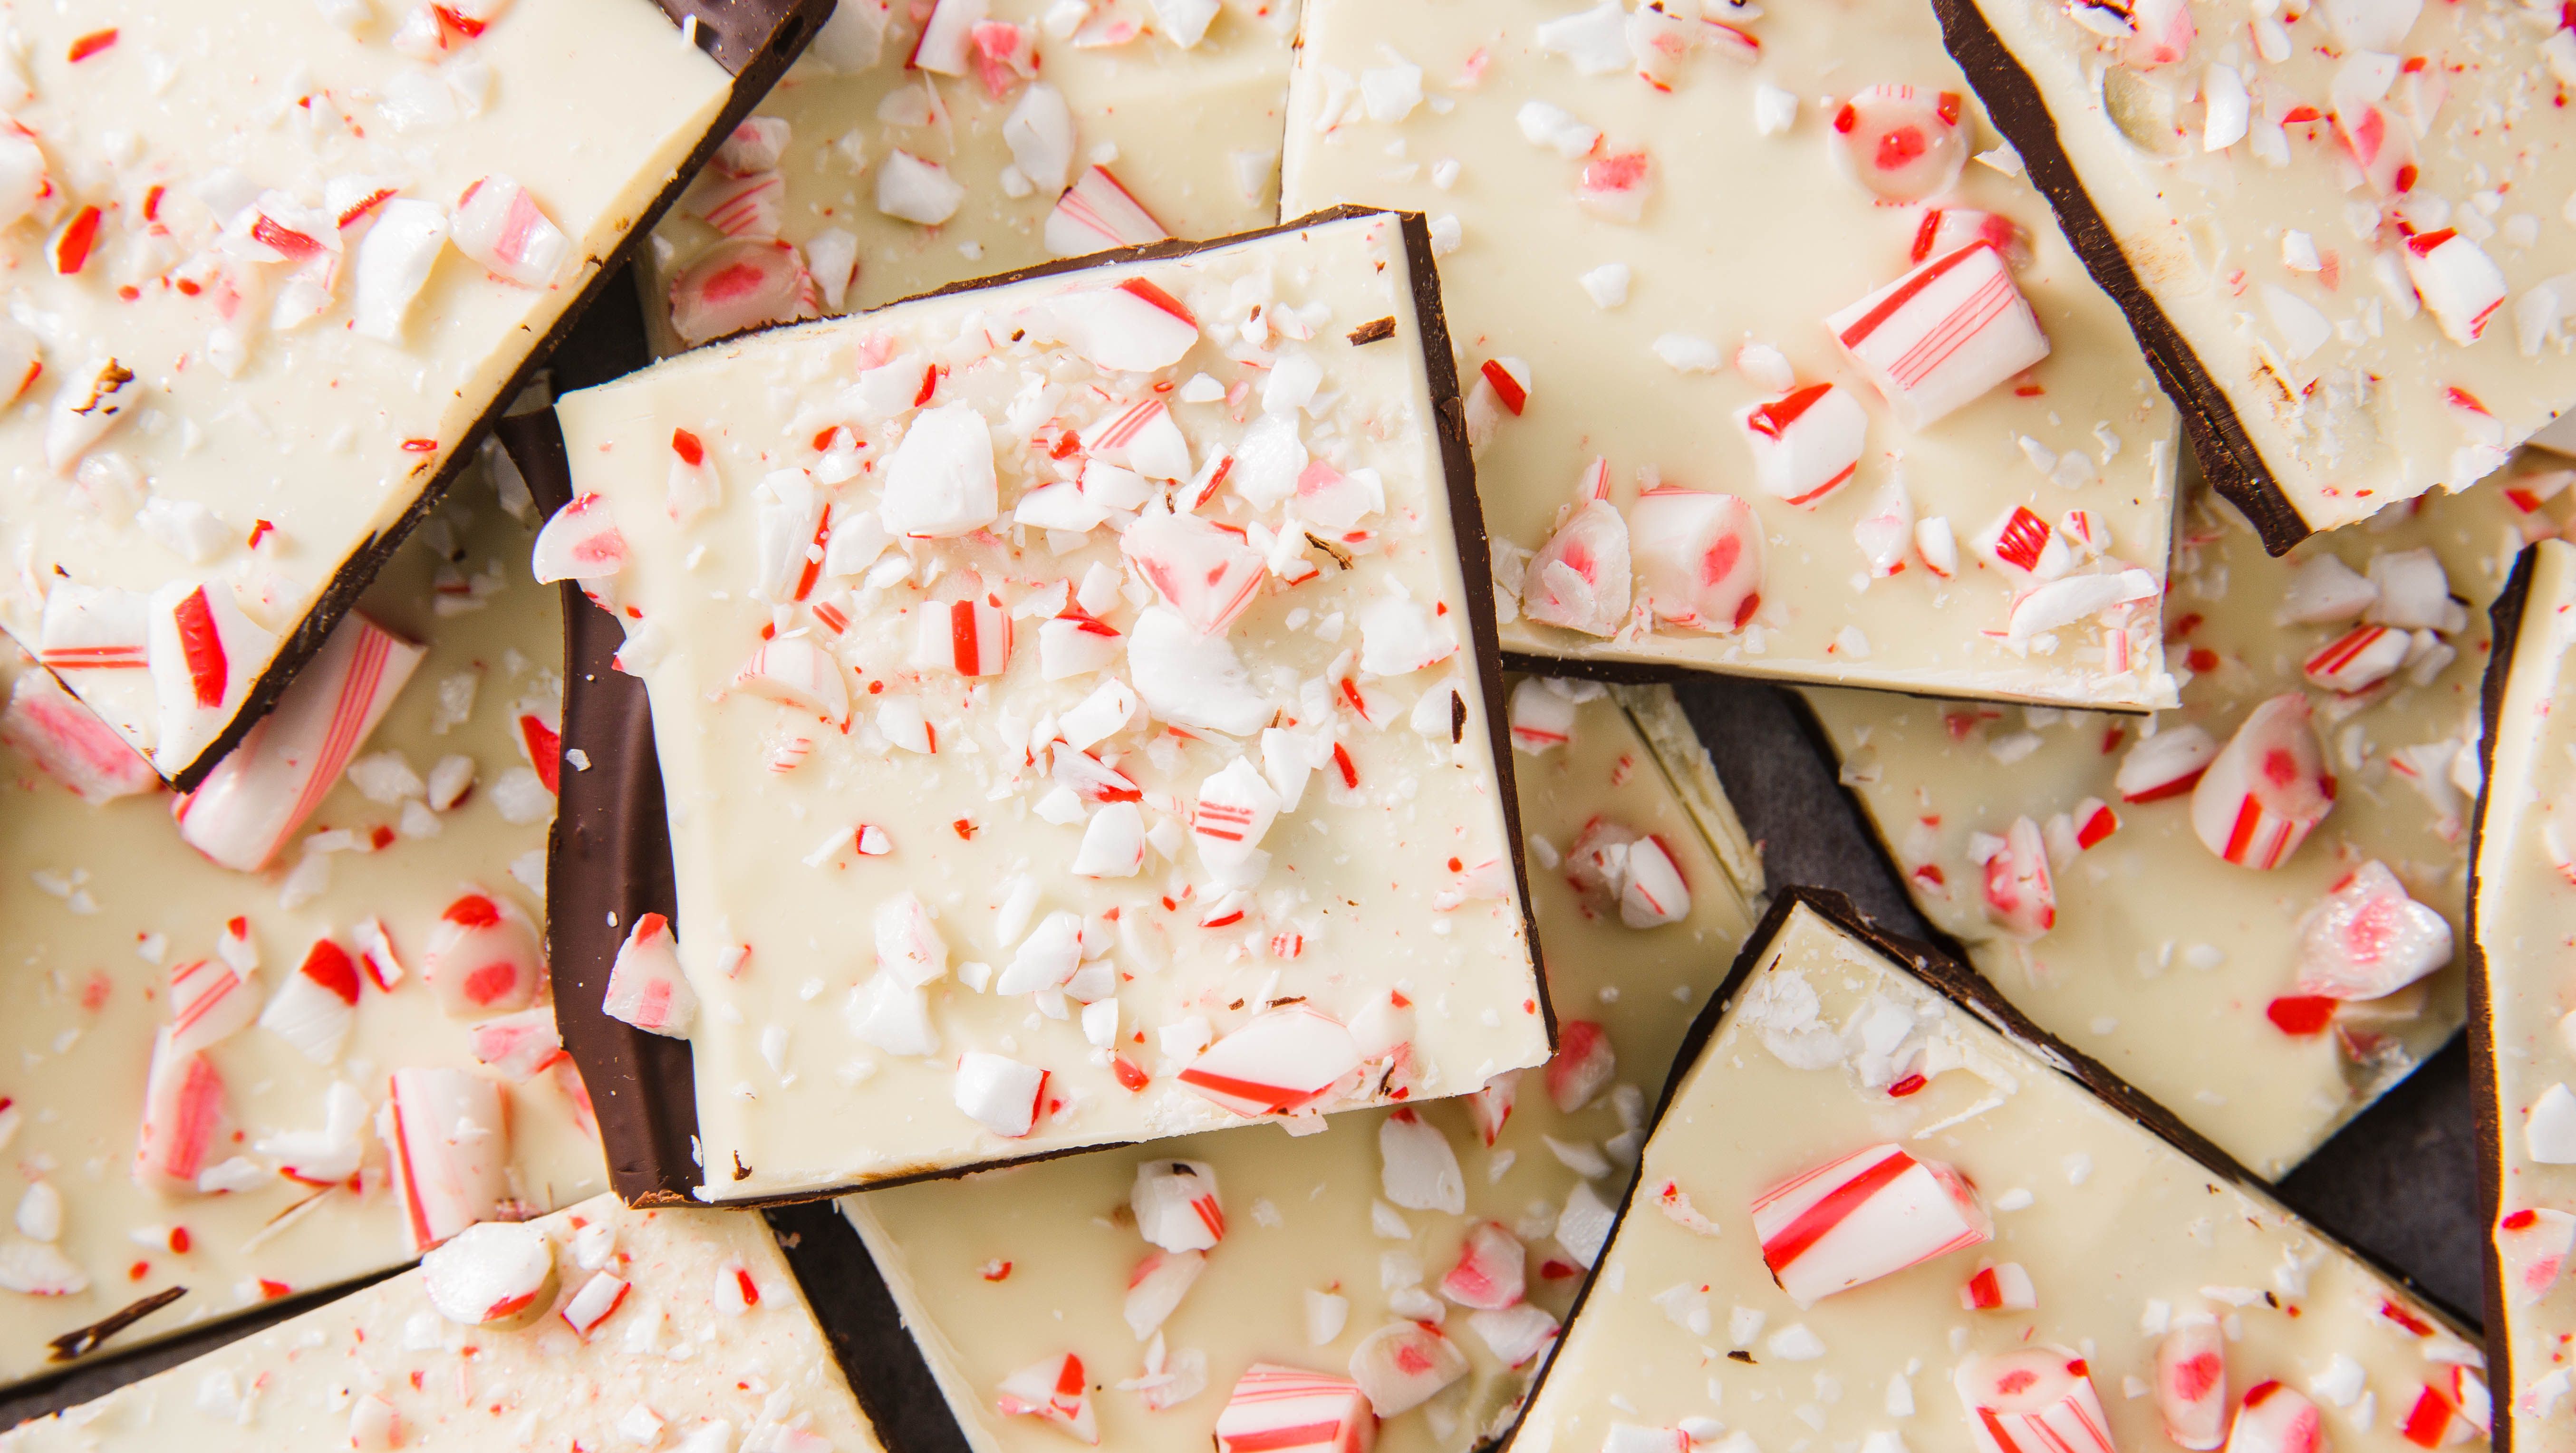 50 Christmas Candy Recipes - Chocolate Chocolate and More!